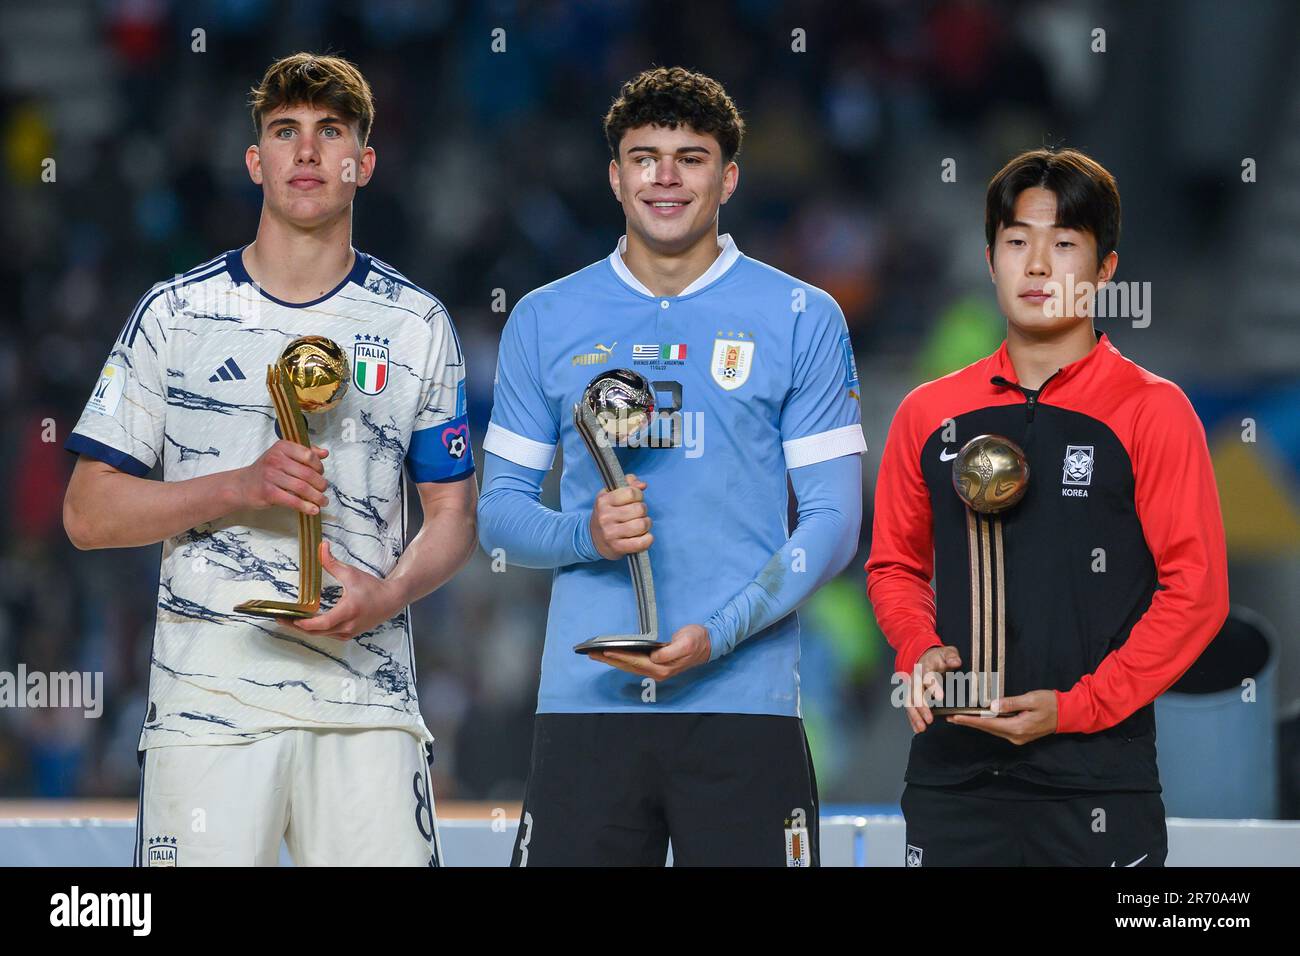 Cesare Casadei of Italy poses with the Adidas Golden Ball Trophy, Alan Matturro of Uruguay poses with the Adidas Silver Ball Trophy and Lee Seungwon poses with the Adidas Bronze Ball Trophy during the FIFA U-20 World Cup Argentina 2023 Final match between Italy and Uruguay at Estadio La Plata. Stock Photo